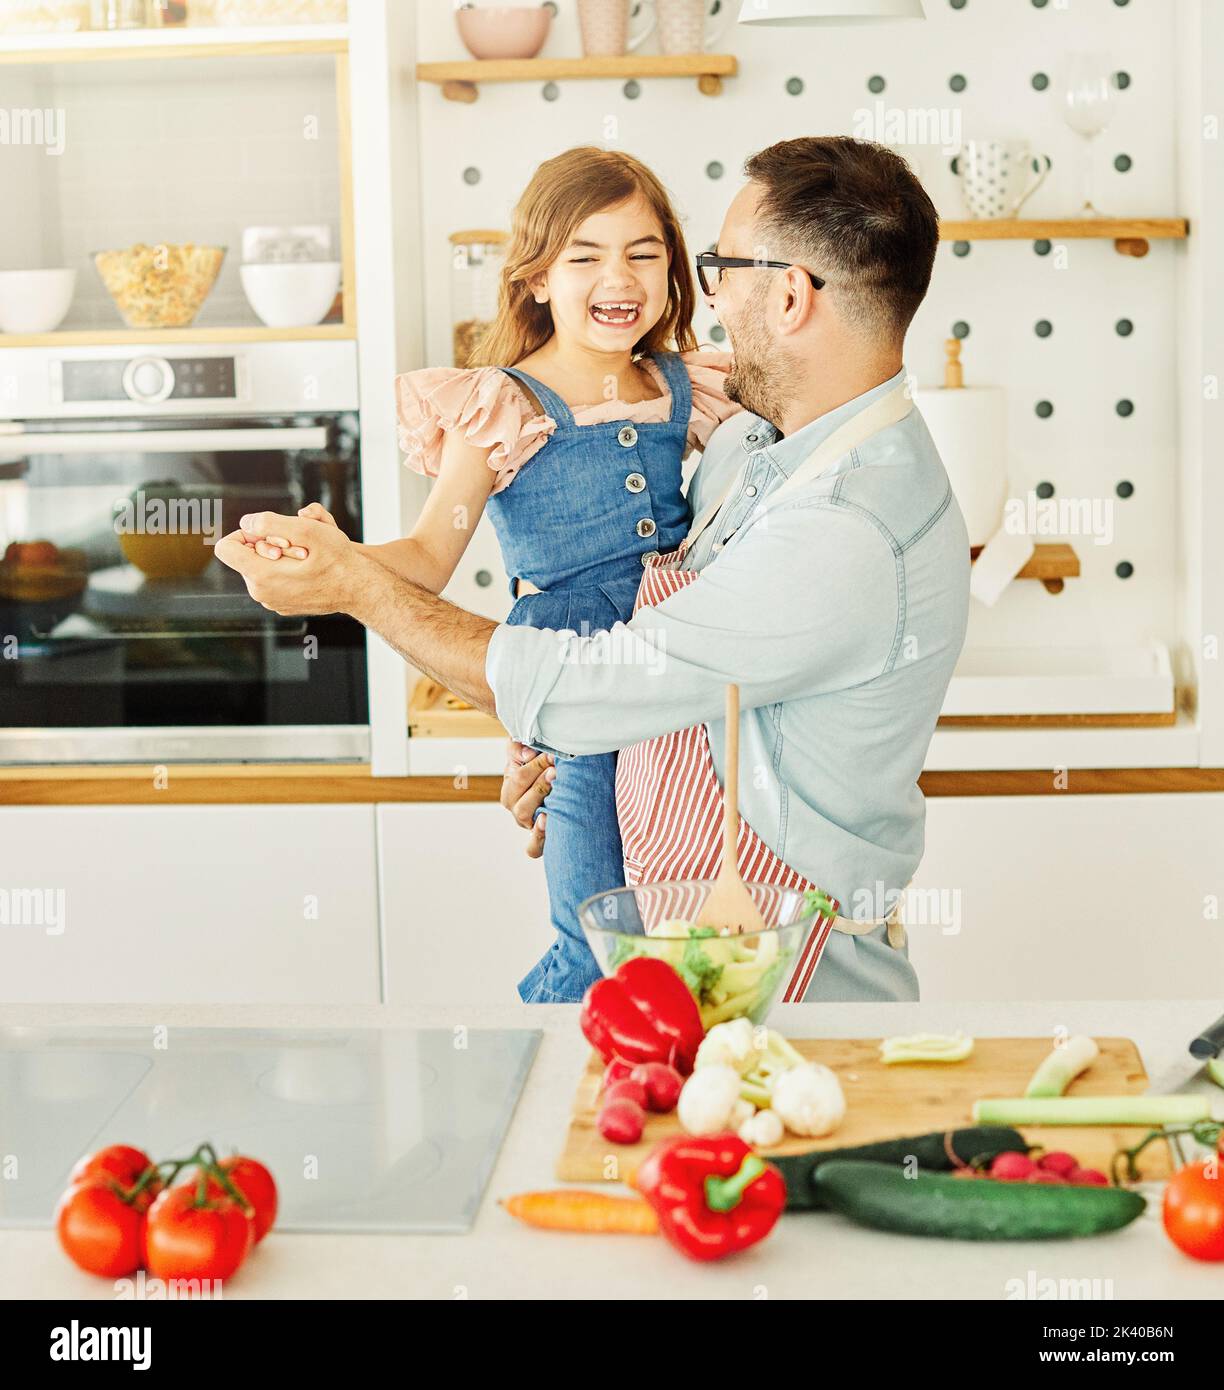 daughter father kitchen food preparing cooking child bonding happy girl together home parent dancing fun Stock Photo